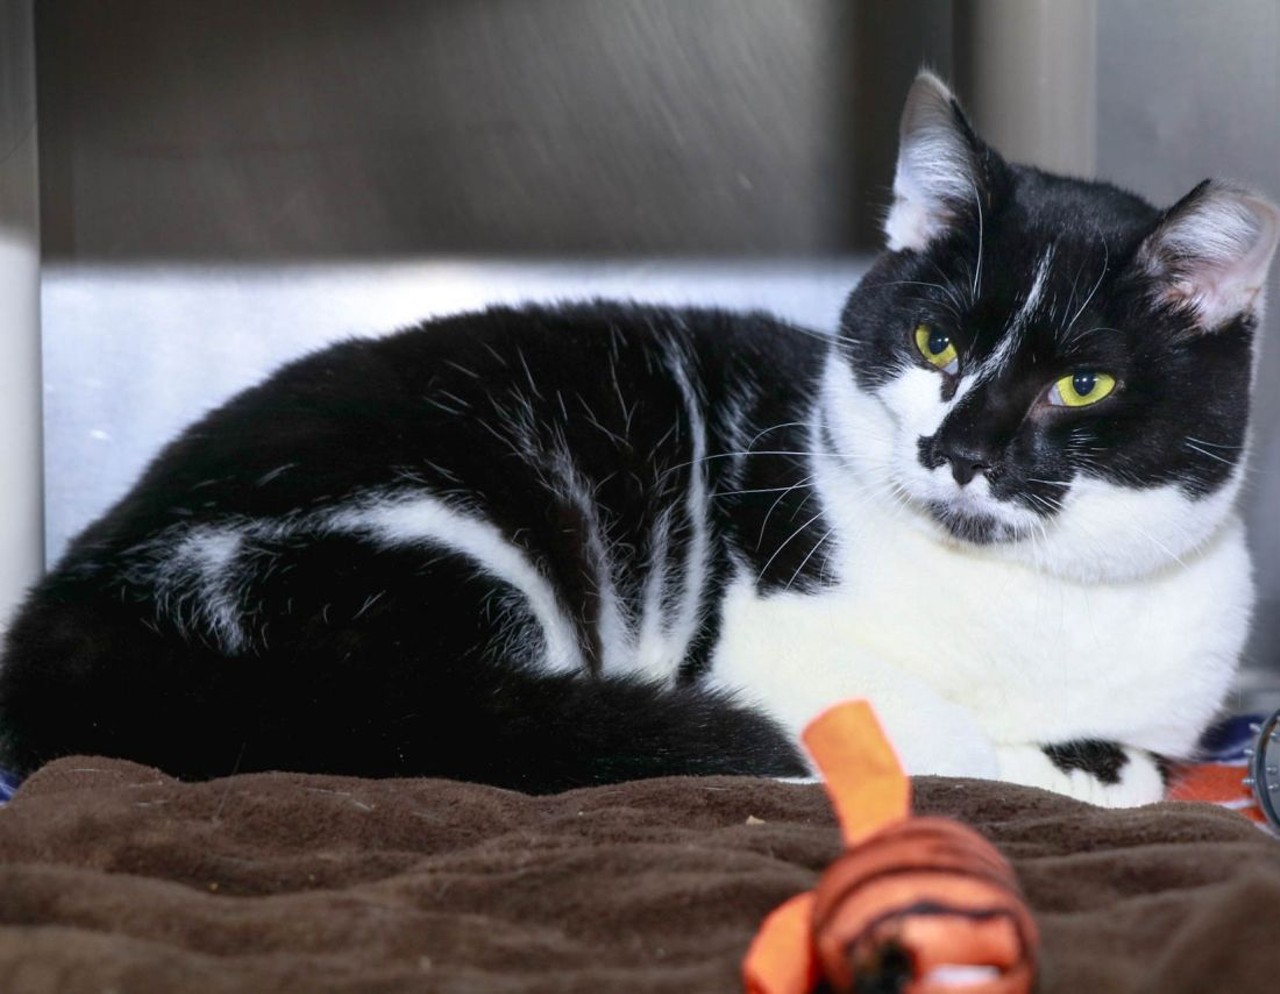 NAME: Aston
GENDER: Male
BREED: Domestic Short Hair
AGE: 10 months
WEIGHT: 9 pounds
SPECIAL CONSIDERATIONS: &#147;Hard-working&#148;, or barn cat
REASON I CAME TO MHS: Owner surrender
LOCATION: Rochester Hills Center for Animal Care
ID NUMBER: 856404